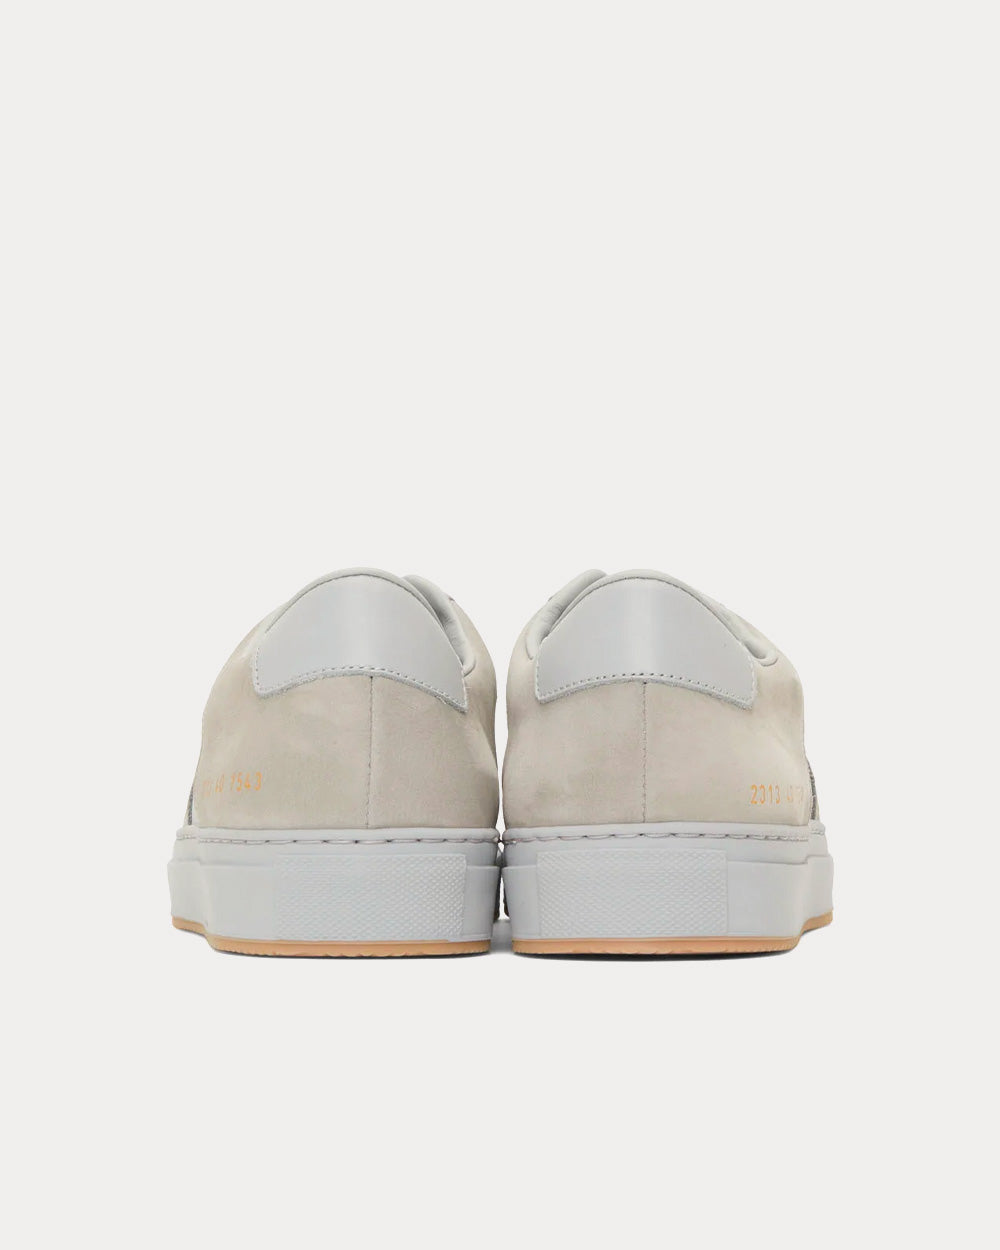 Common Projects - BBall Leather Grey Low Top Sneakers